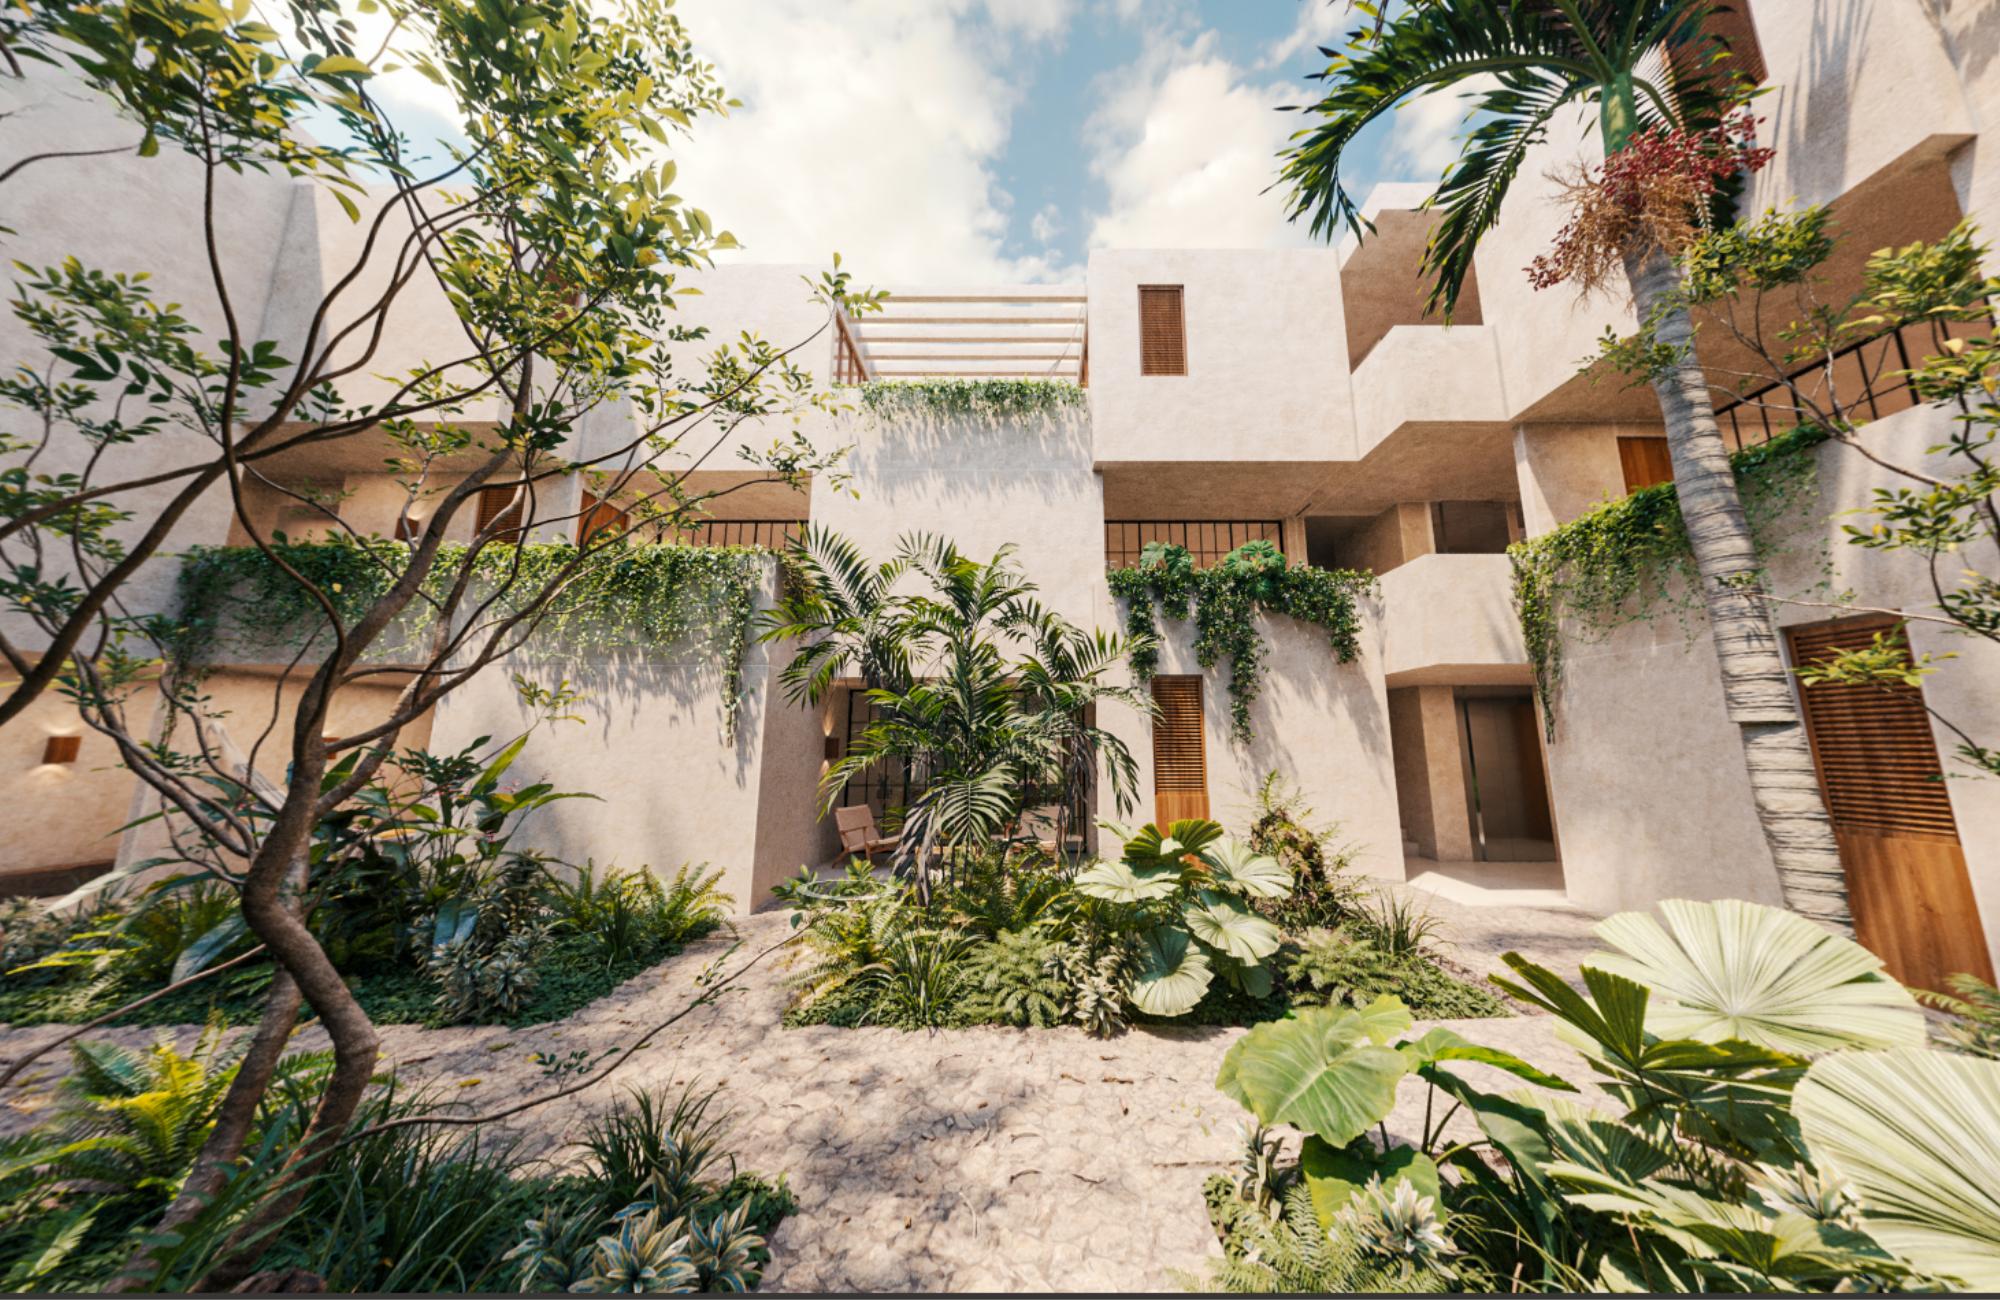 Apartment with private garden and terrace for sale in Merida Centro.